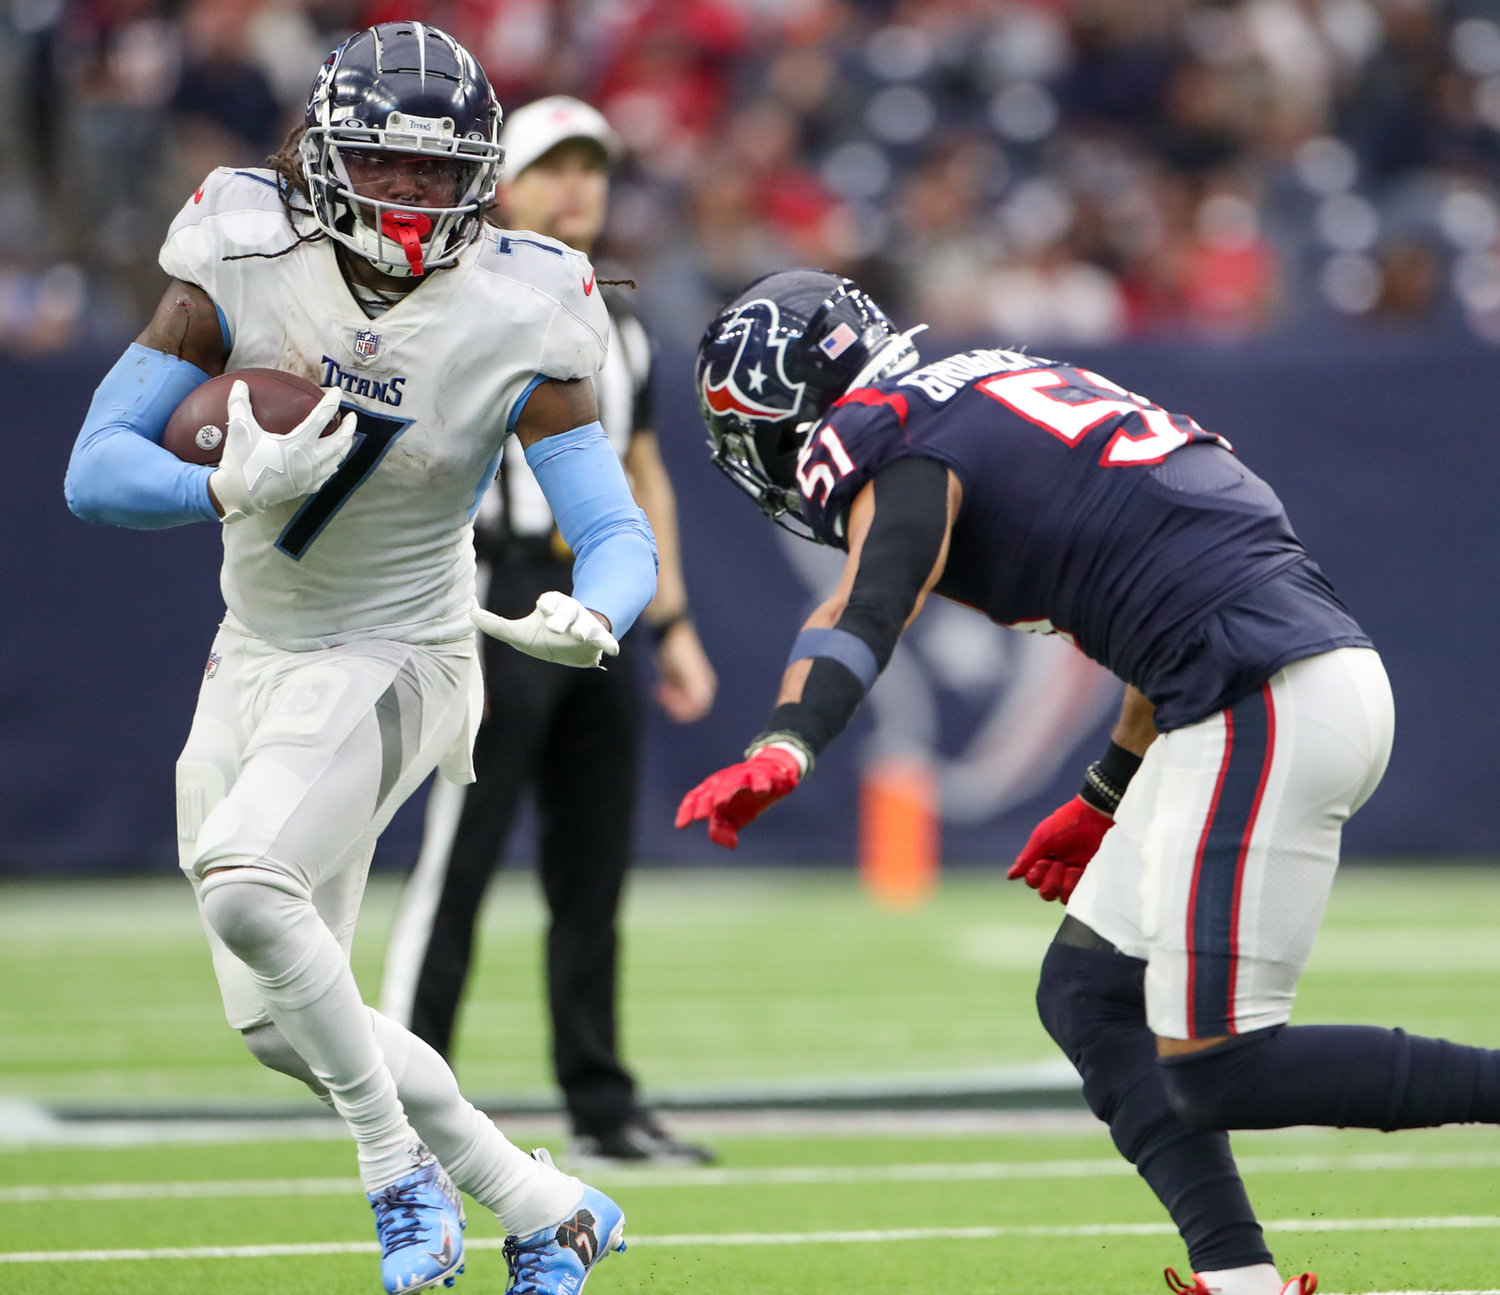 Tennessee Titans running back D'Onta Foreman (7) carries the ball during an NFL game between the Texans and the Titans on Jan. 9, 2022 in Houston, Texas. The Titans won, 28-25.